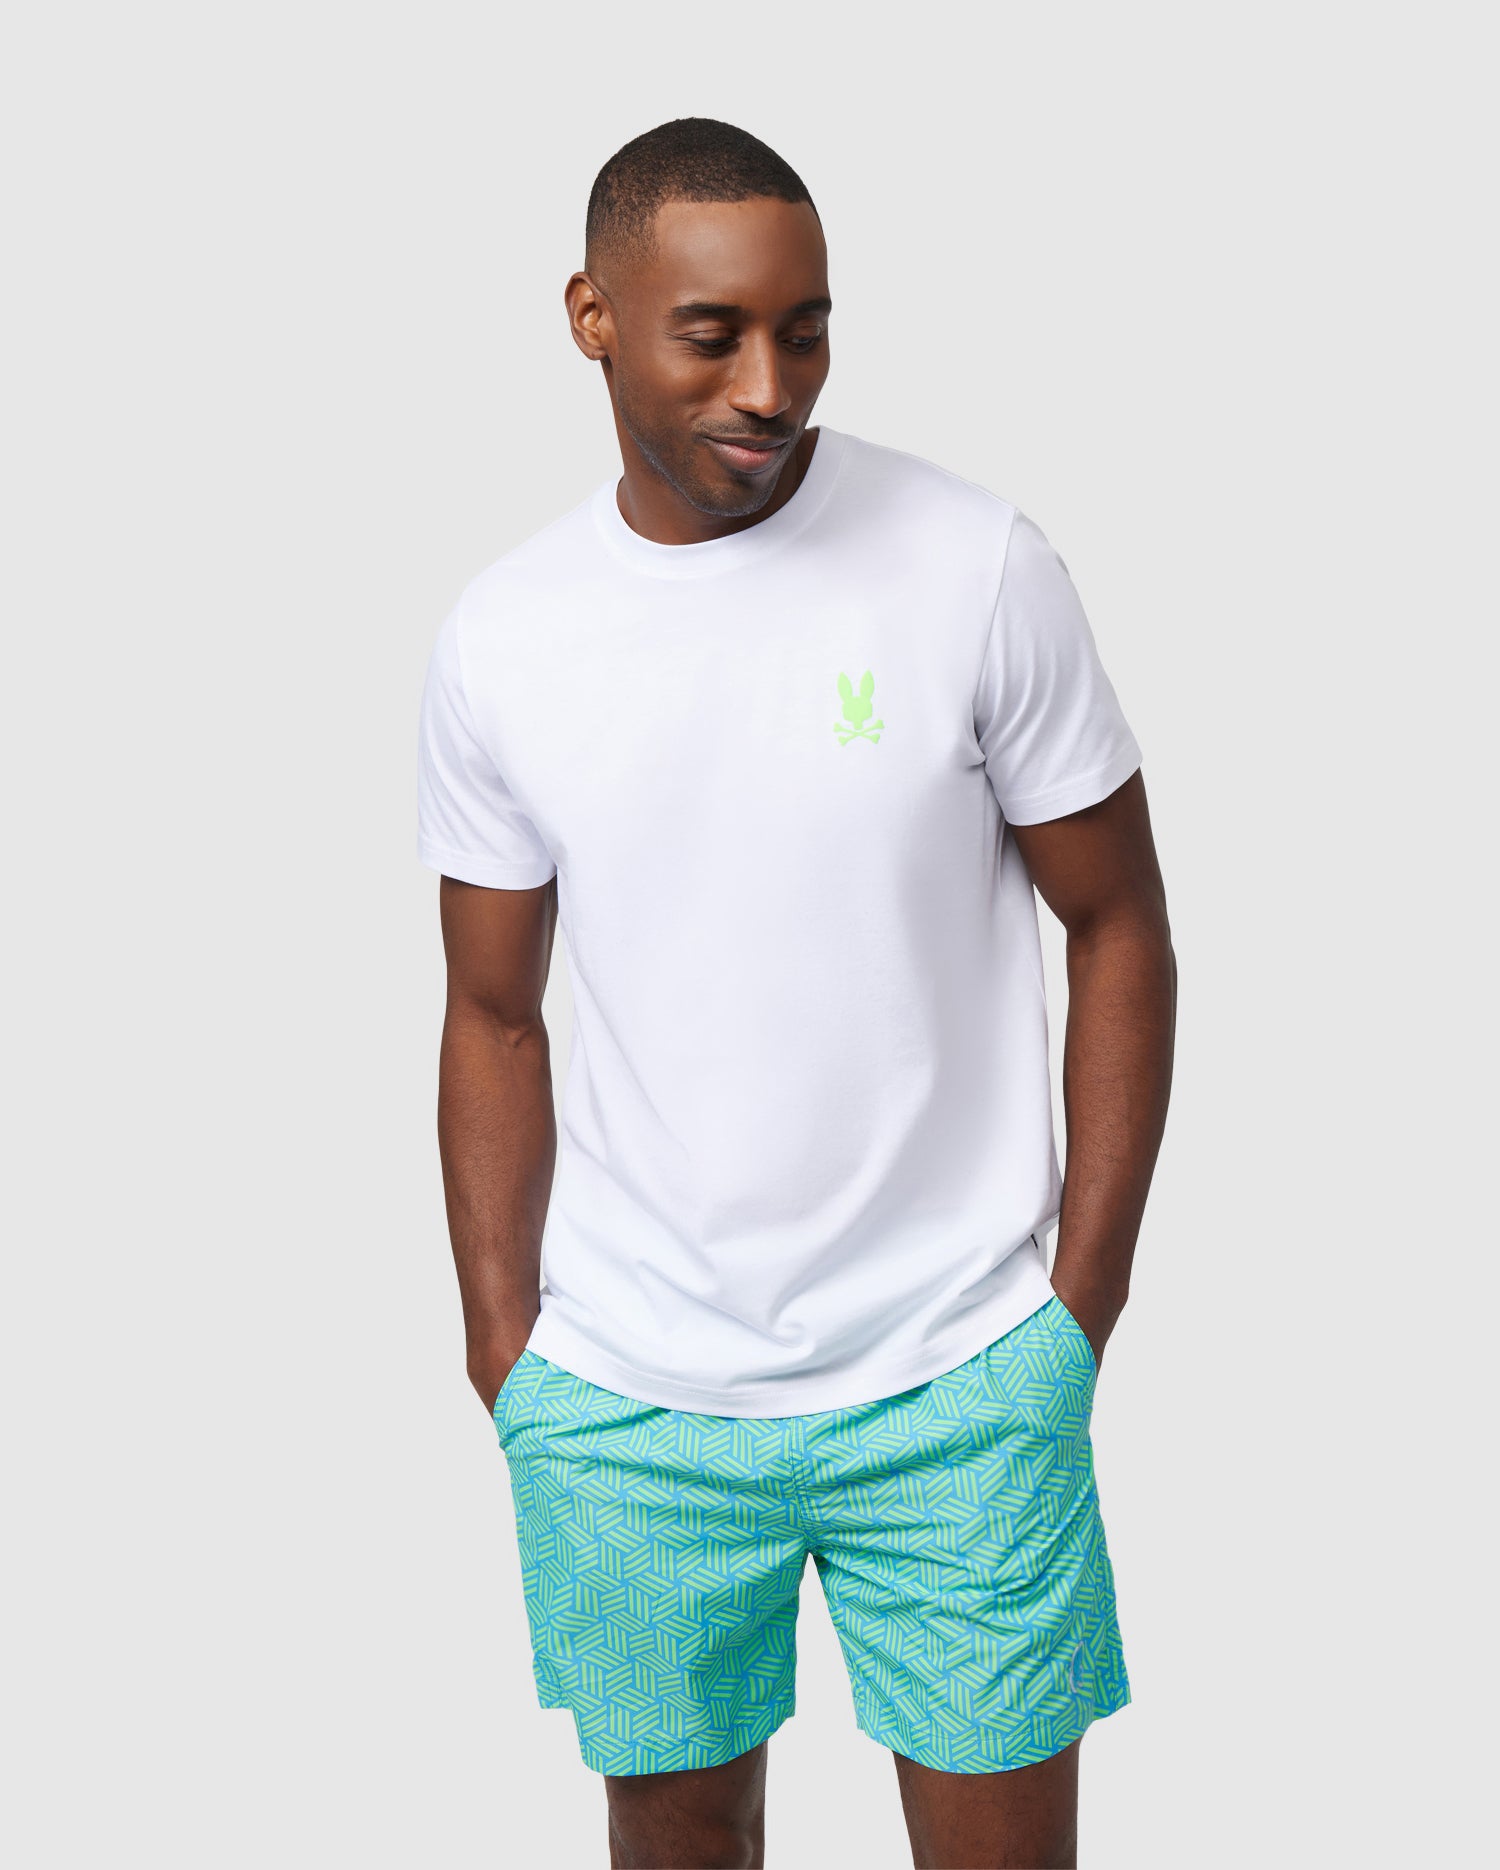 A man in a Psycho Bunny MENS SLOAN BACK GRAPHIC TEE with a small green logo and turquoise patterned shorts stands against a light gray background, looking to his right with a relaxed pose.